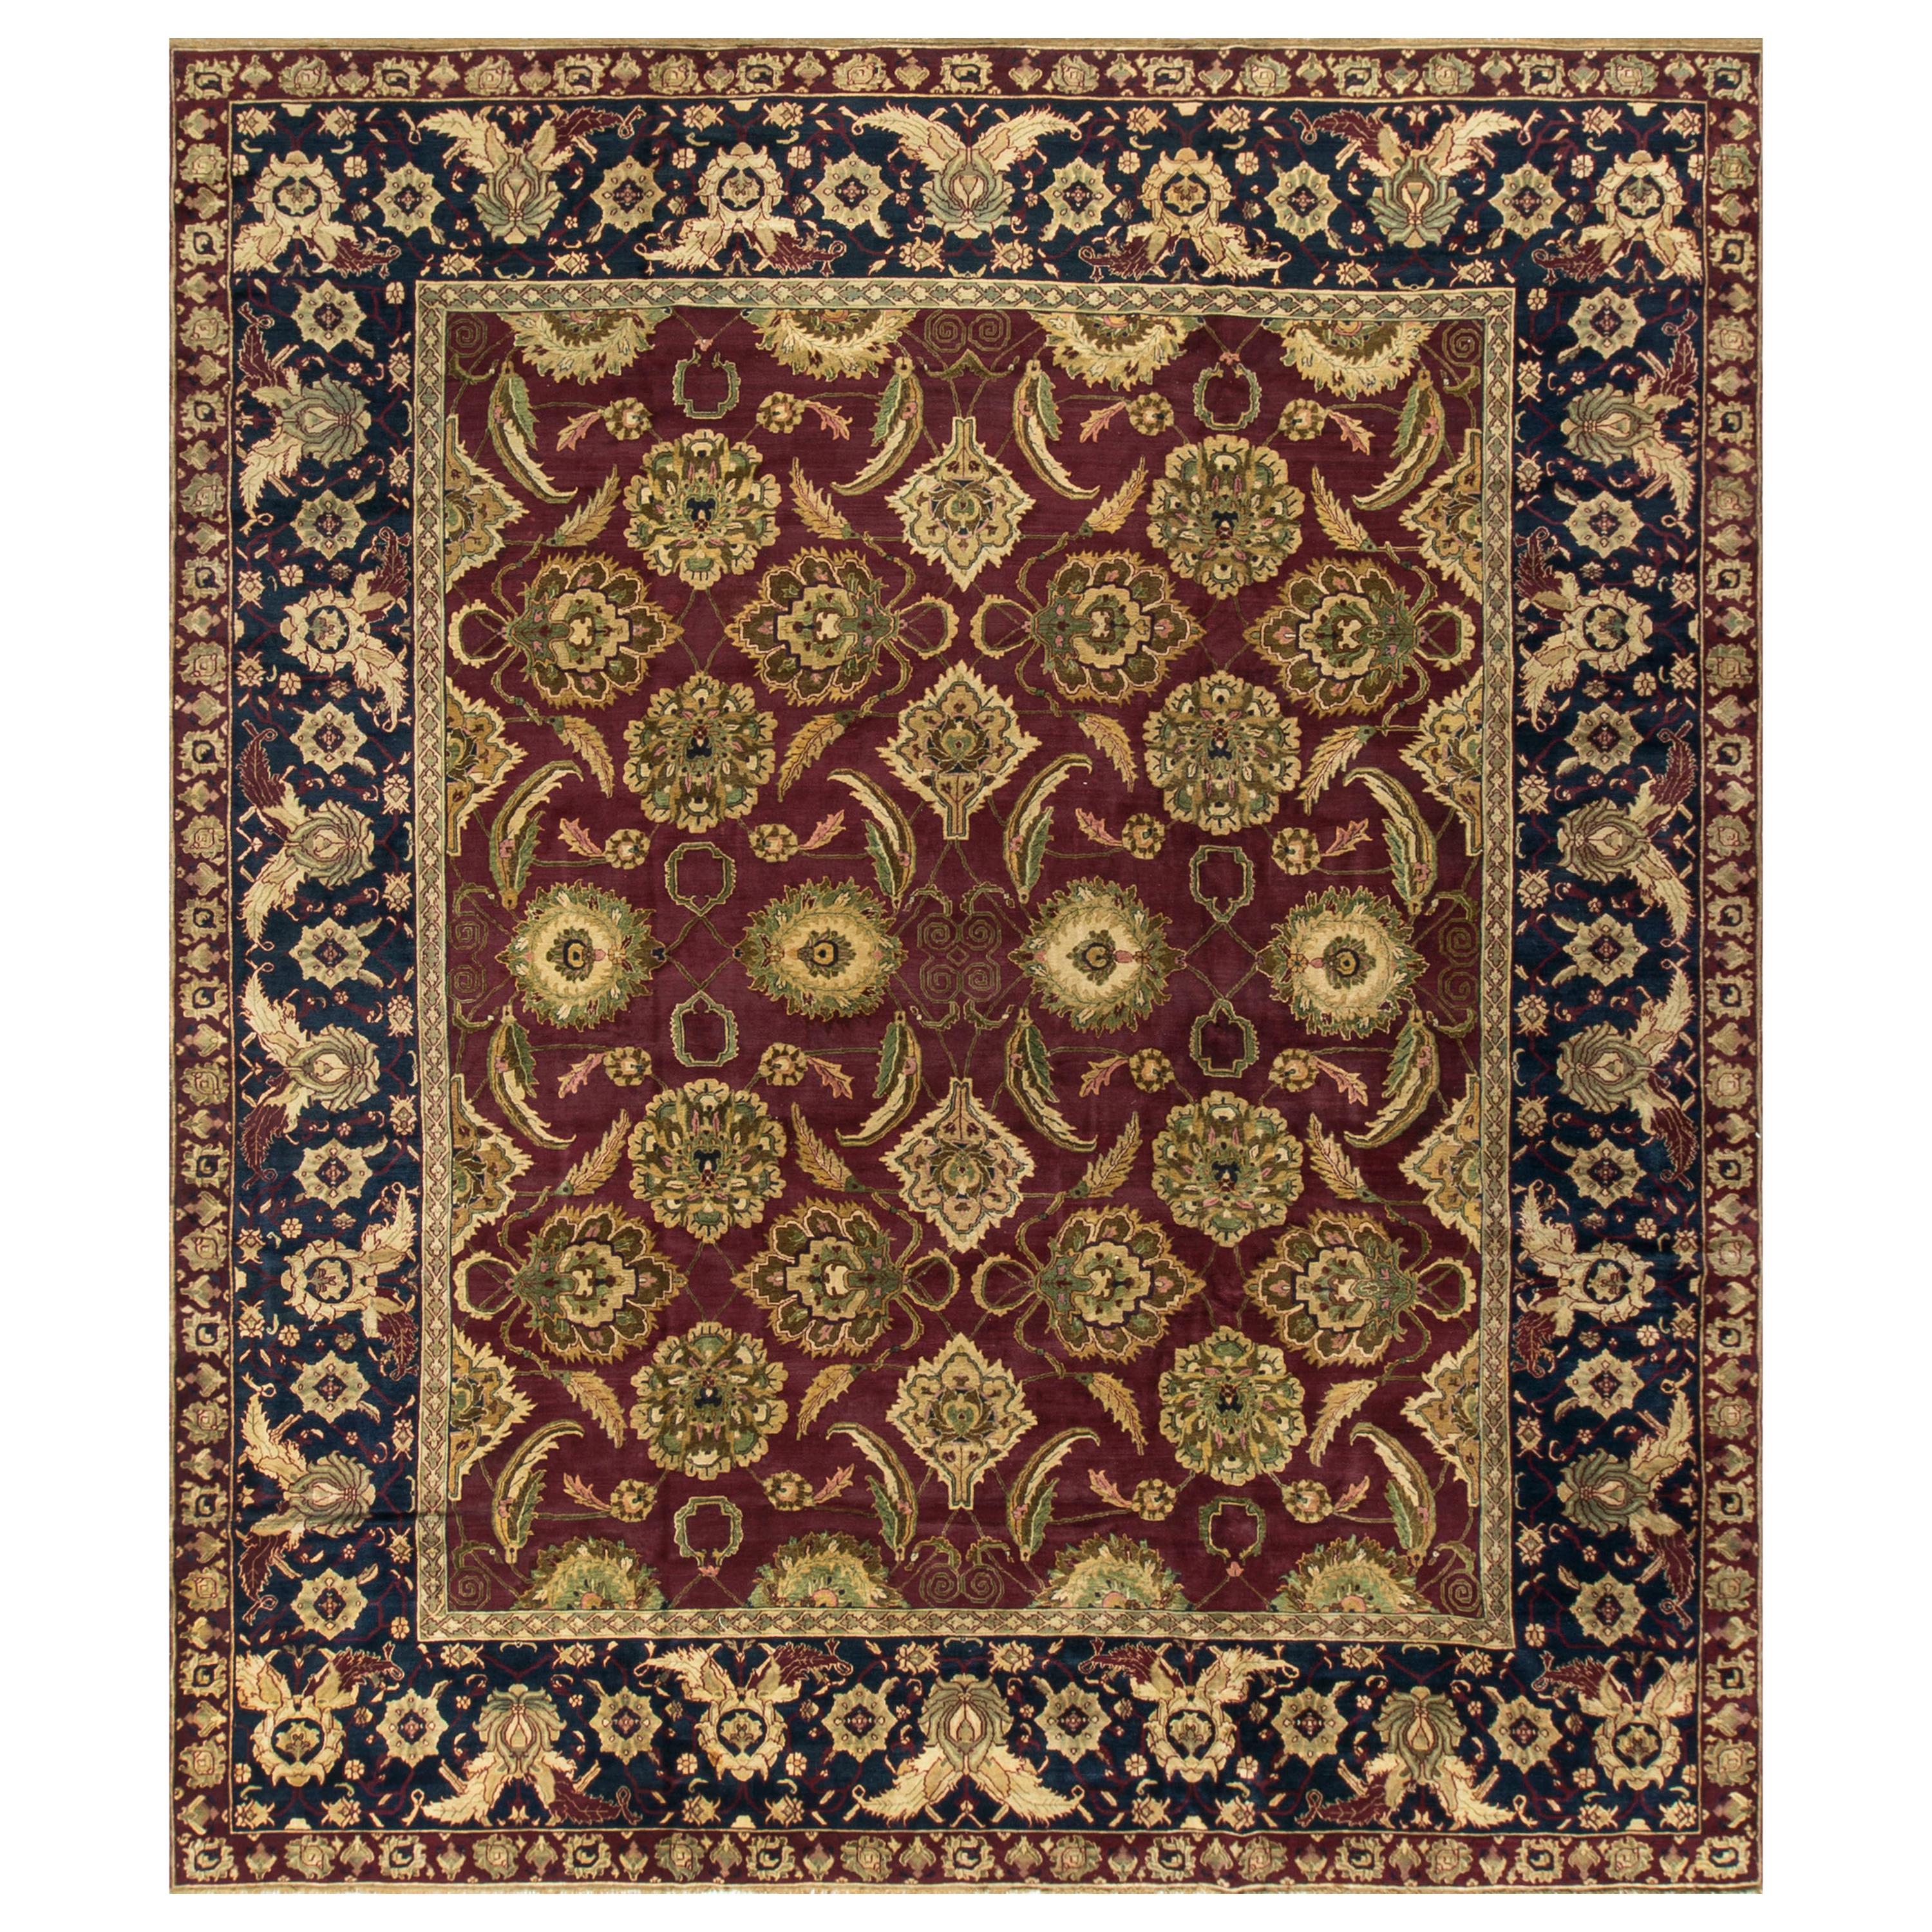 Ancien tapis indien Agra rouge / marine, circa 1890, taille 11'8 x 13'7